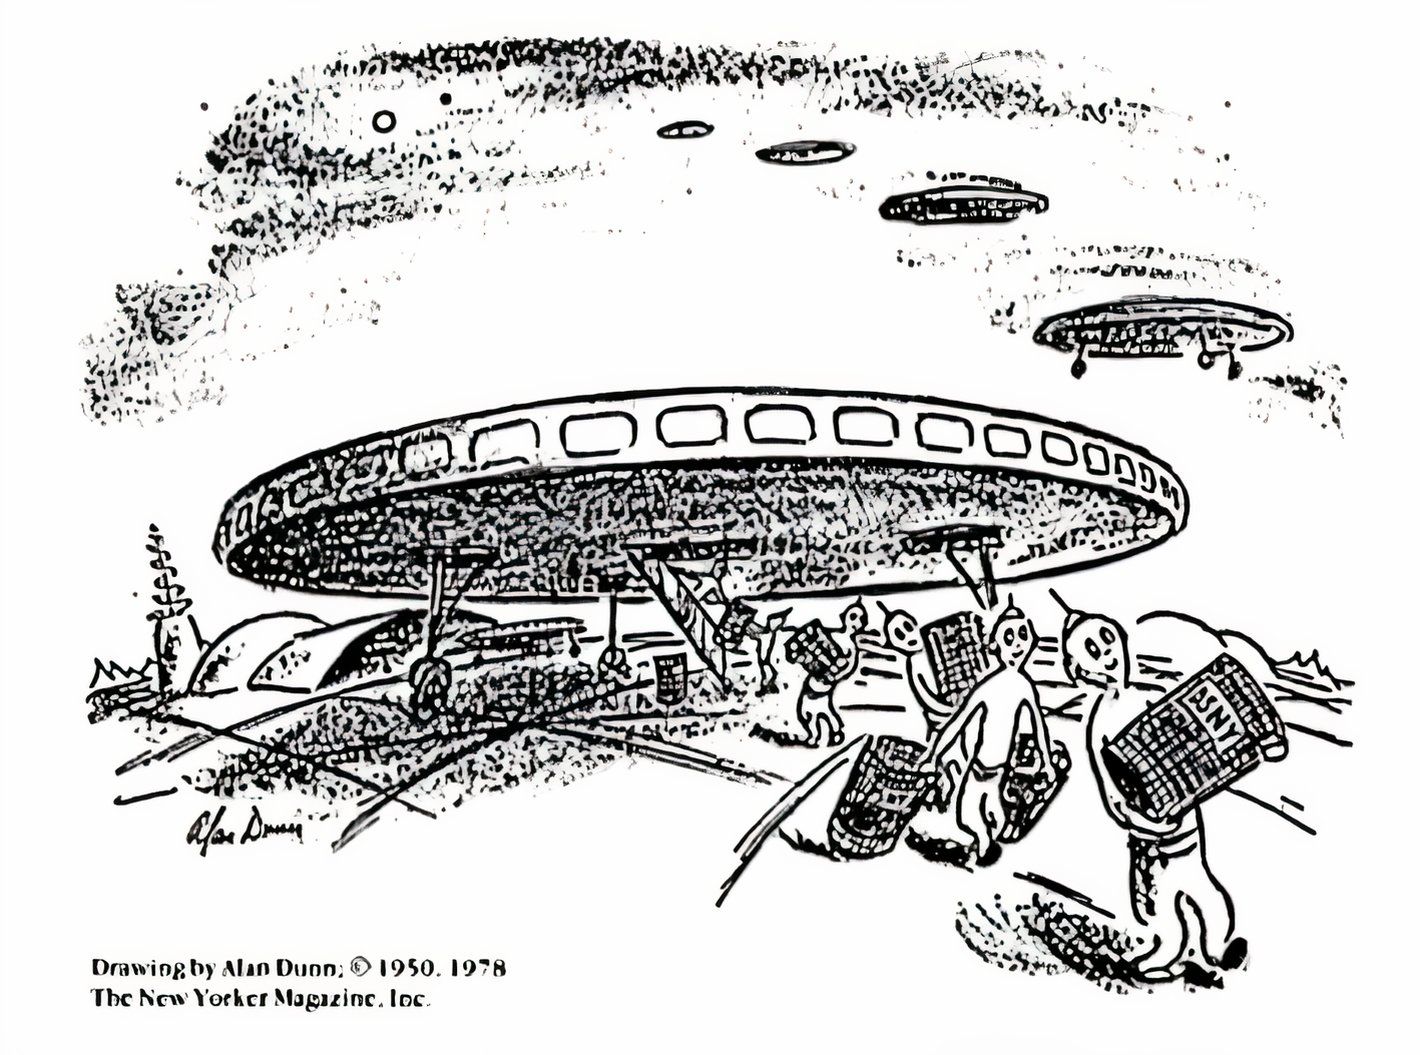 Alan Dunn flying saucer illustration that prompted the creation of the Fermi paradox